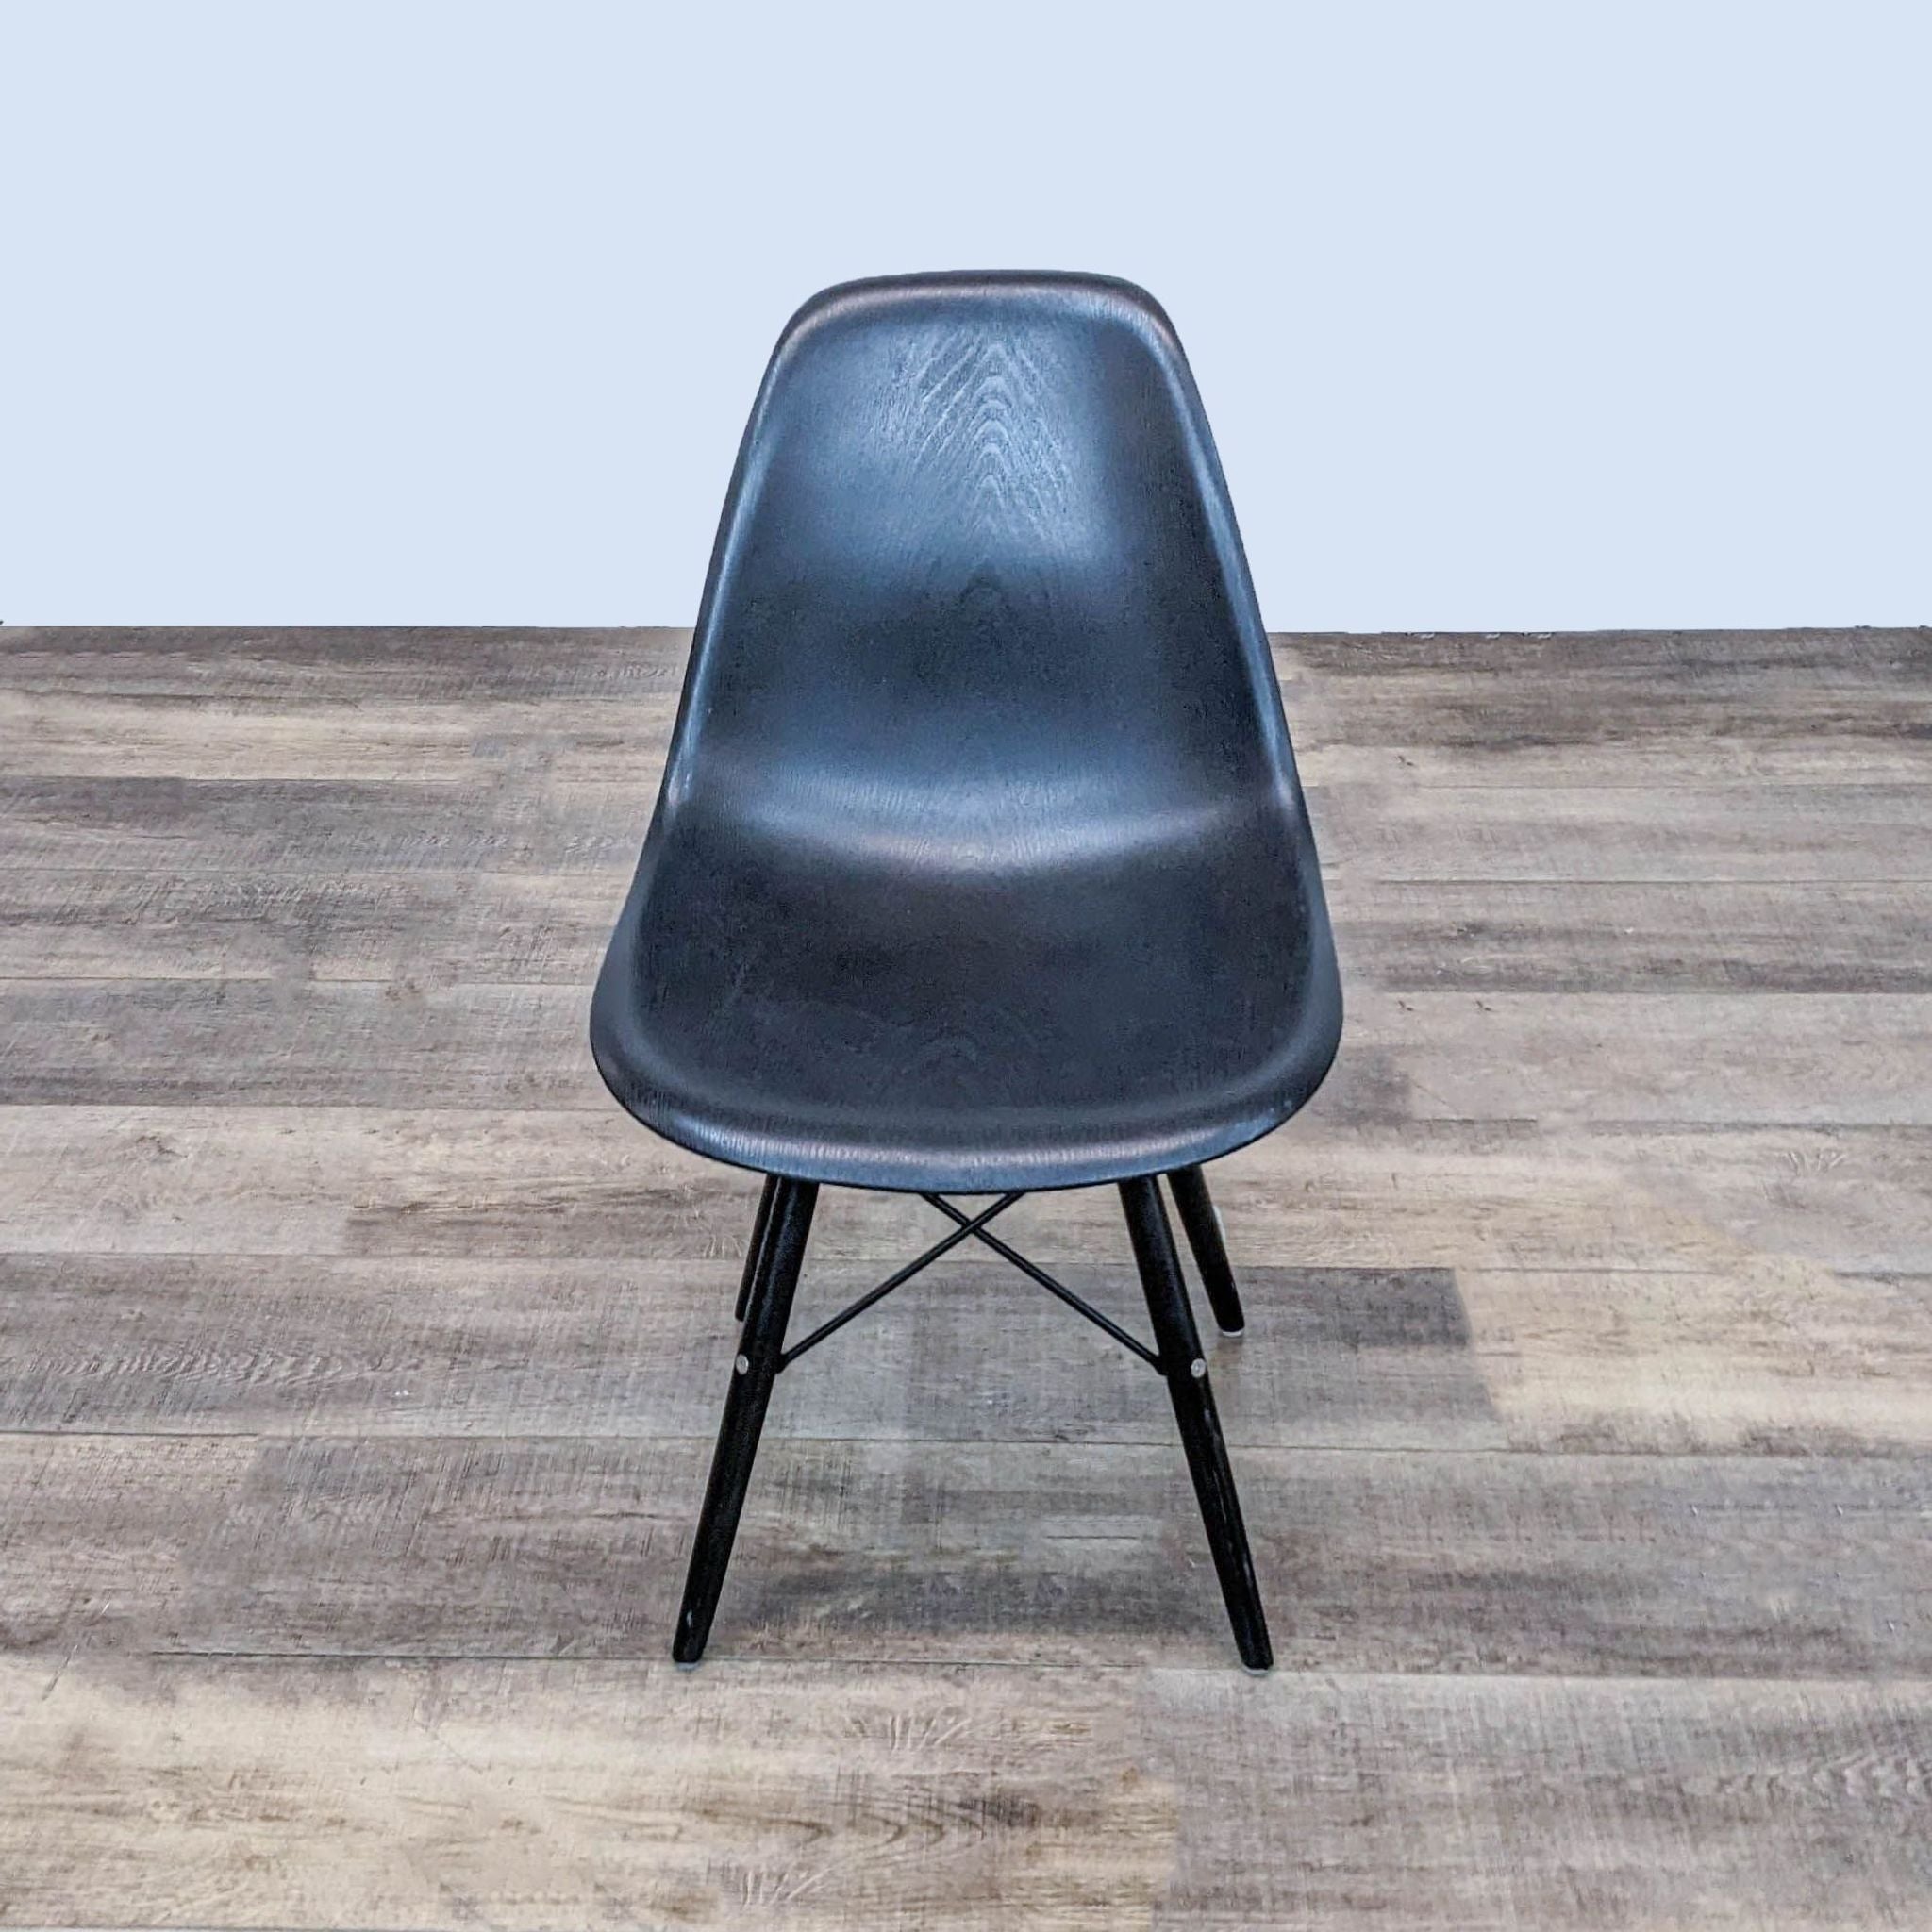 Reperch dining chair with a black contoured moulded seat and a black metal Eiffel style base on a wooden floor.